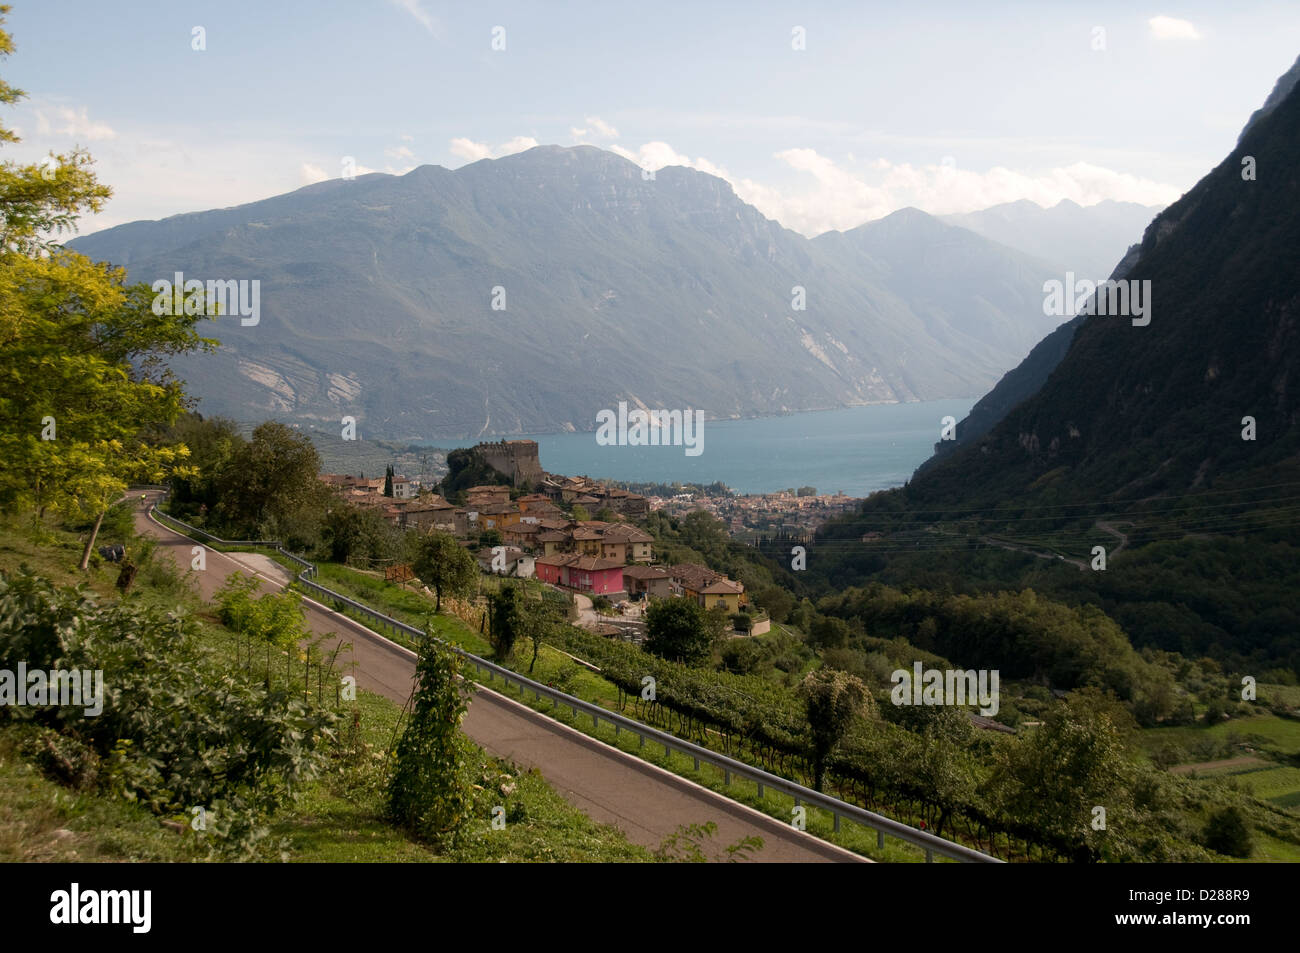 High mountain view of Lake Garda and the Garda mountains from the well-preserved time-warped rural mountain medieval village of ‘Tenno’, with a Stock Photo